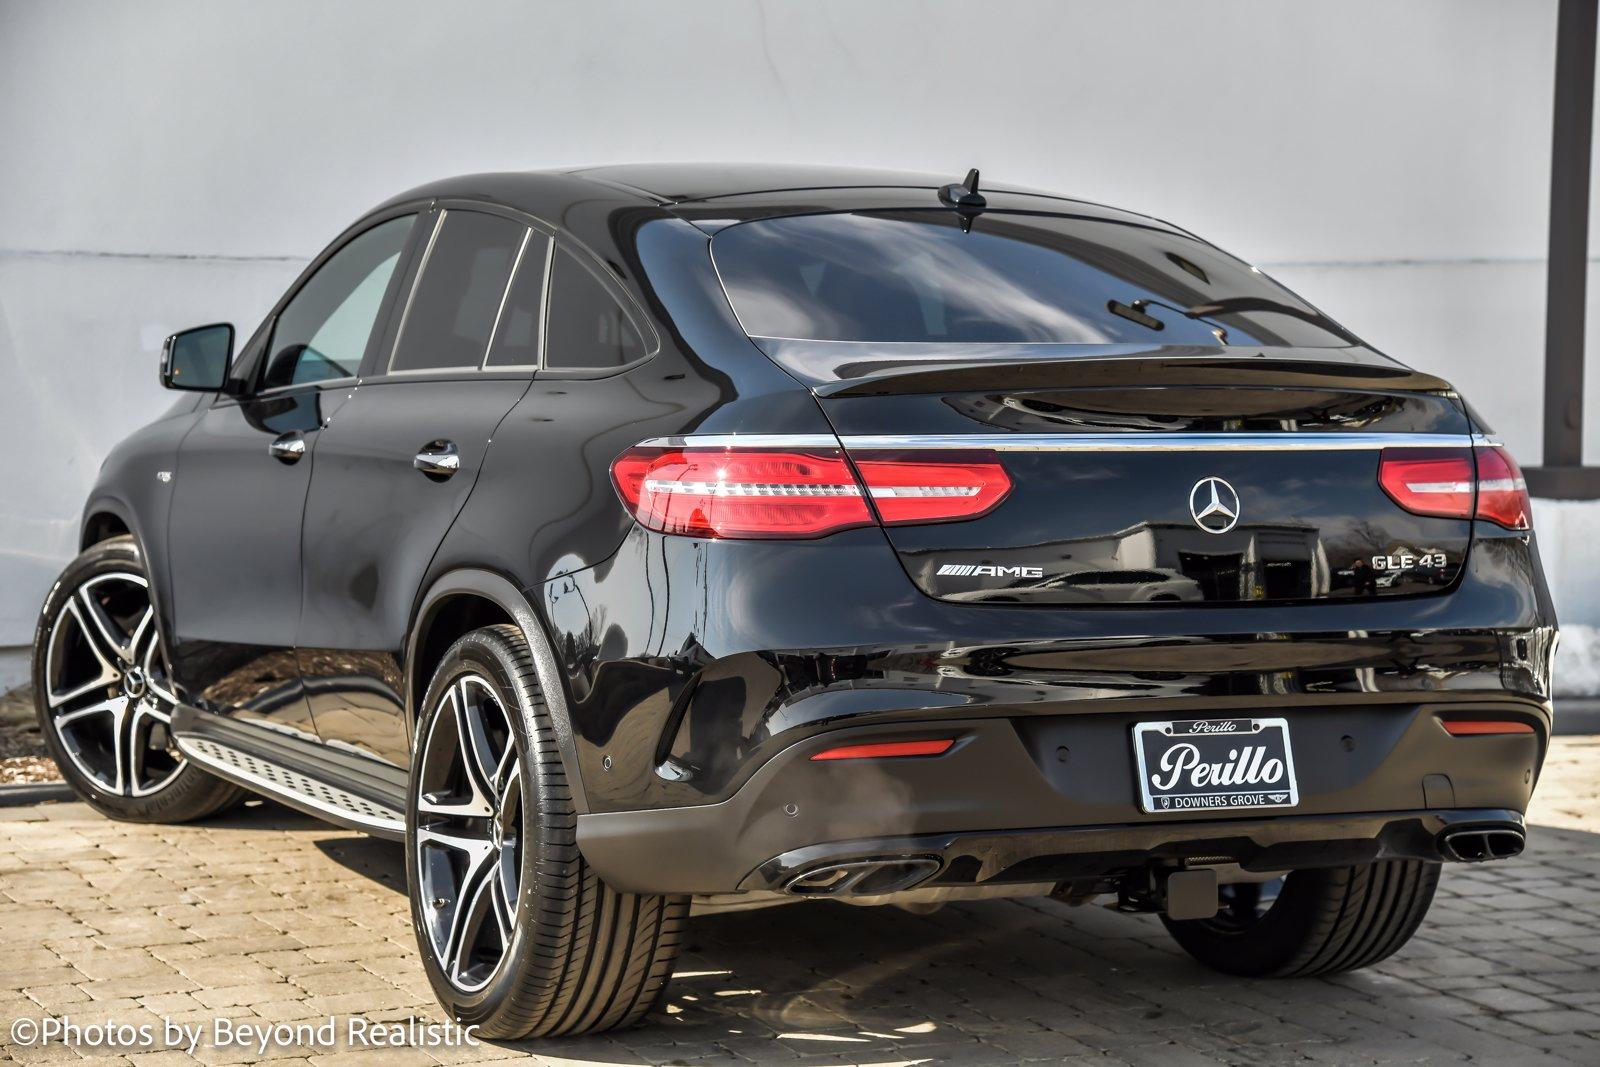 Used 2018 Mercedes-Benz AMG GLE 43 Coupe Premium 3 Pkg, Amg Night Pkg, | Downers Grove, IL